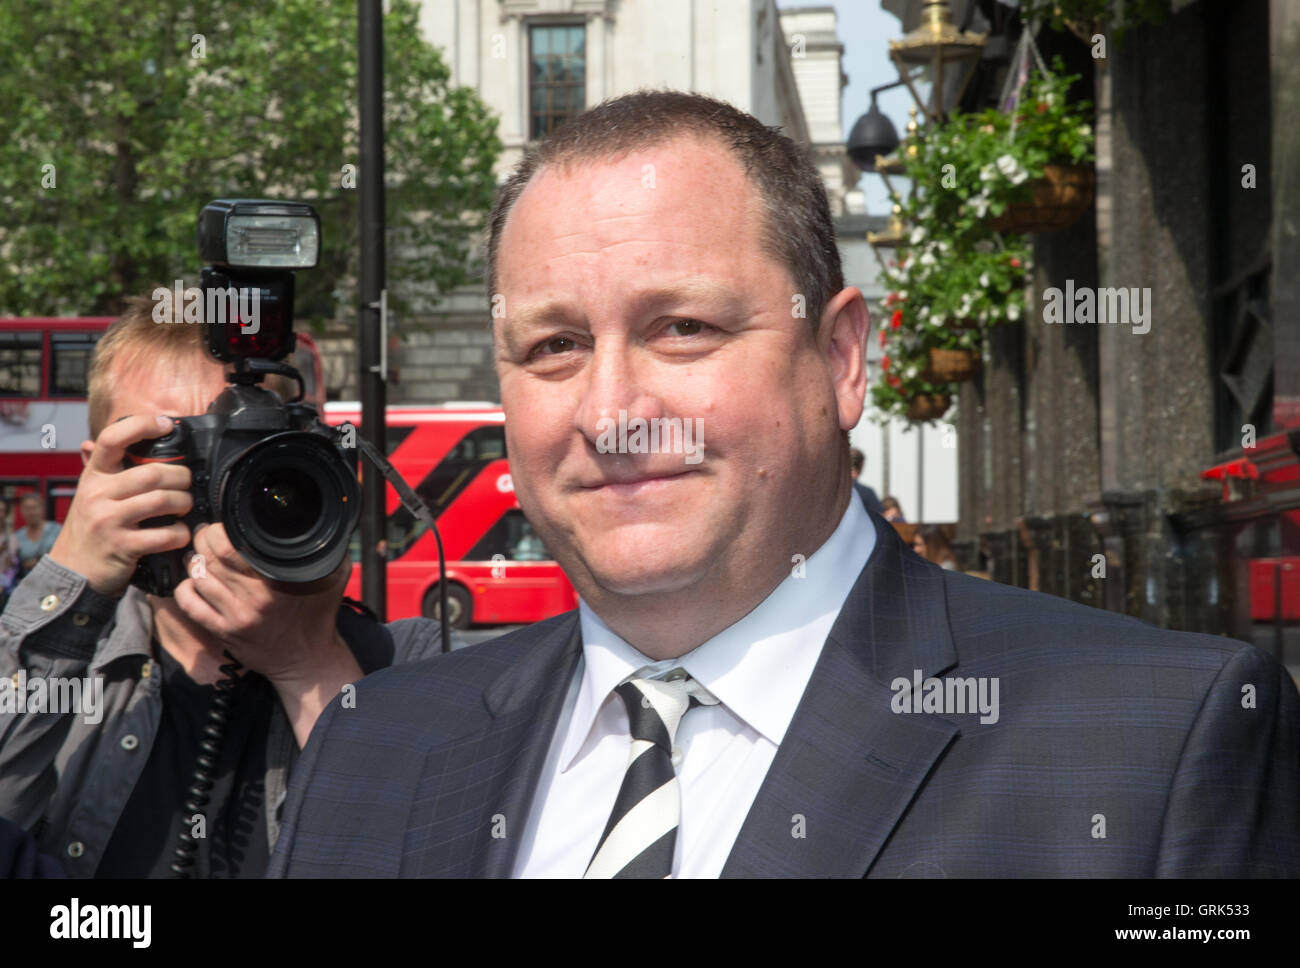 Mike Ashley,managing director of Sports Direct and owner of Newcastle FC,arrives at the Commons select committee for questions Stock Photo